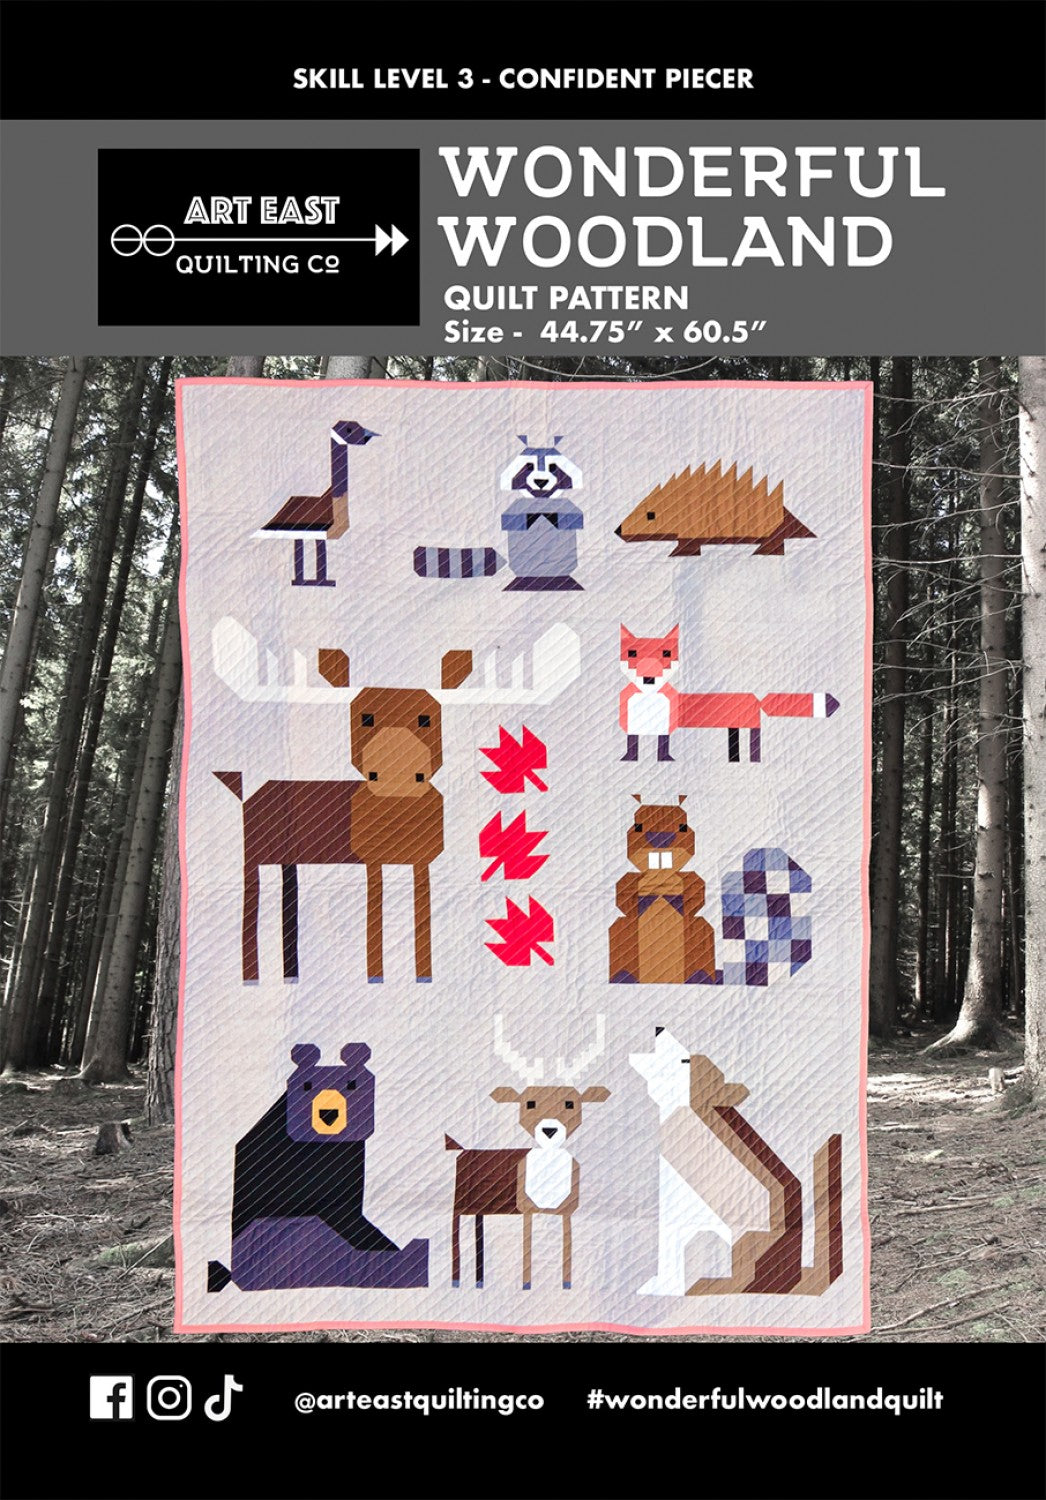 Wonderful Woodland Quilt mönster - Art East Quilting Co